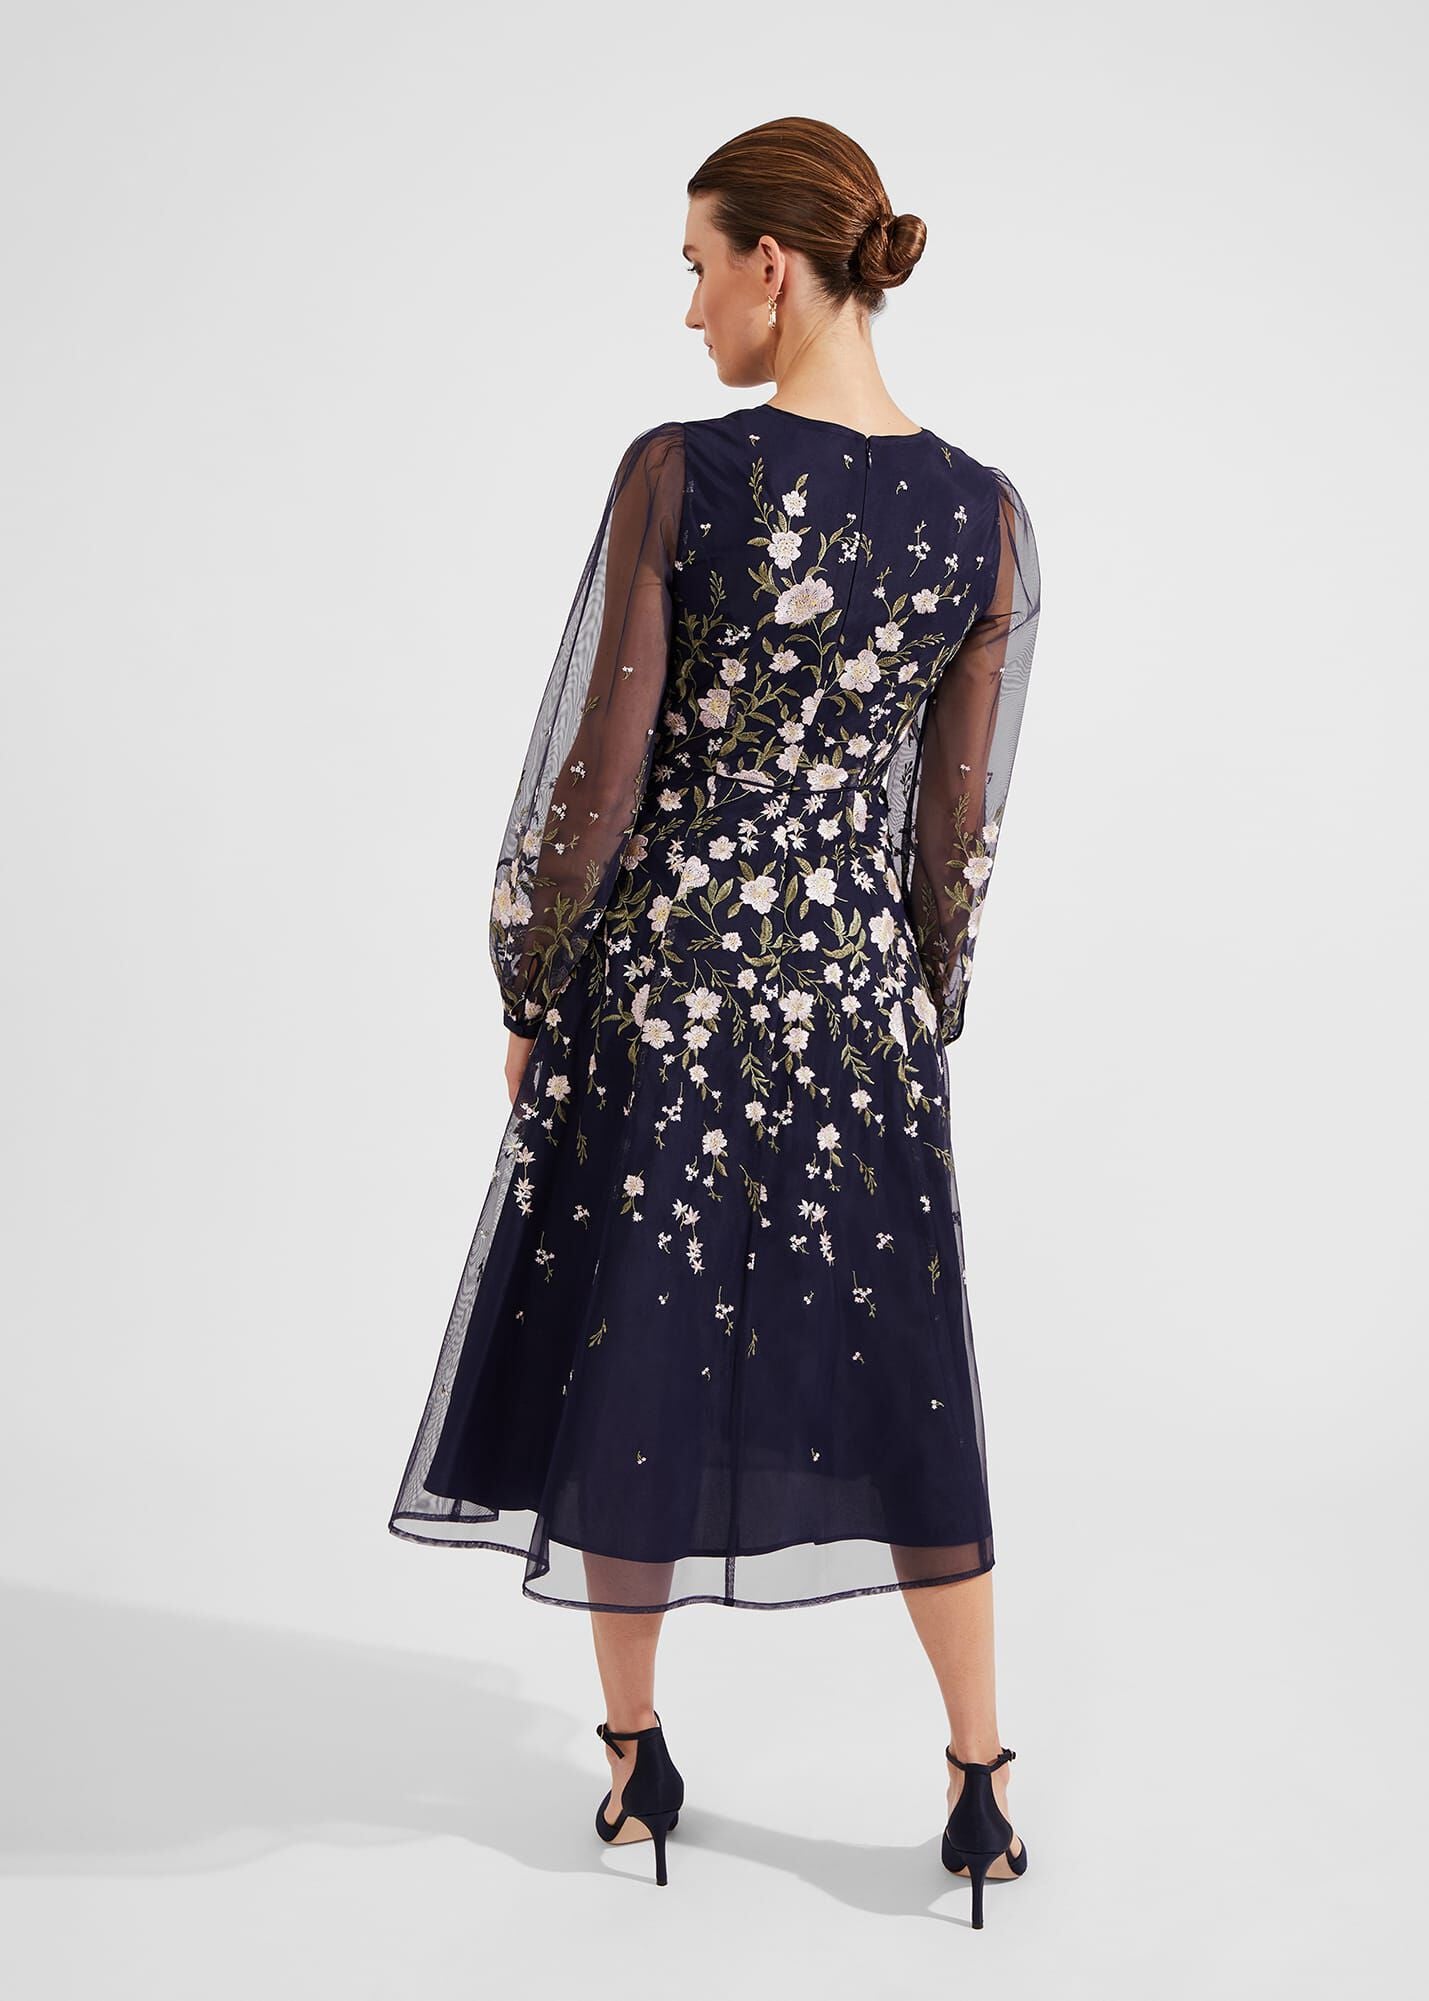 Lois Embroidered Dress 0124/5121/9045l00 Navy-Multi